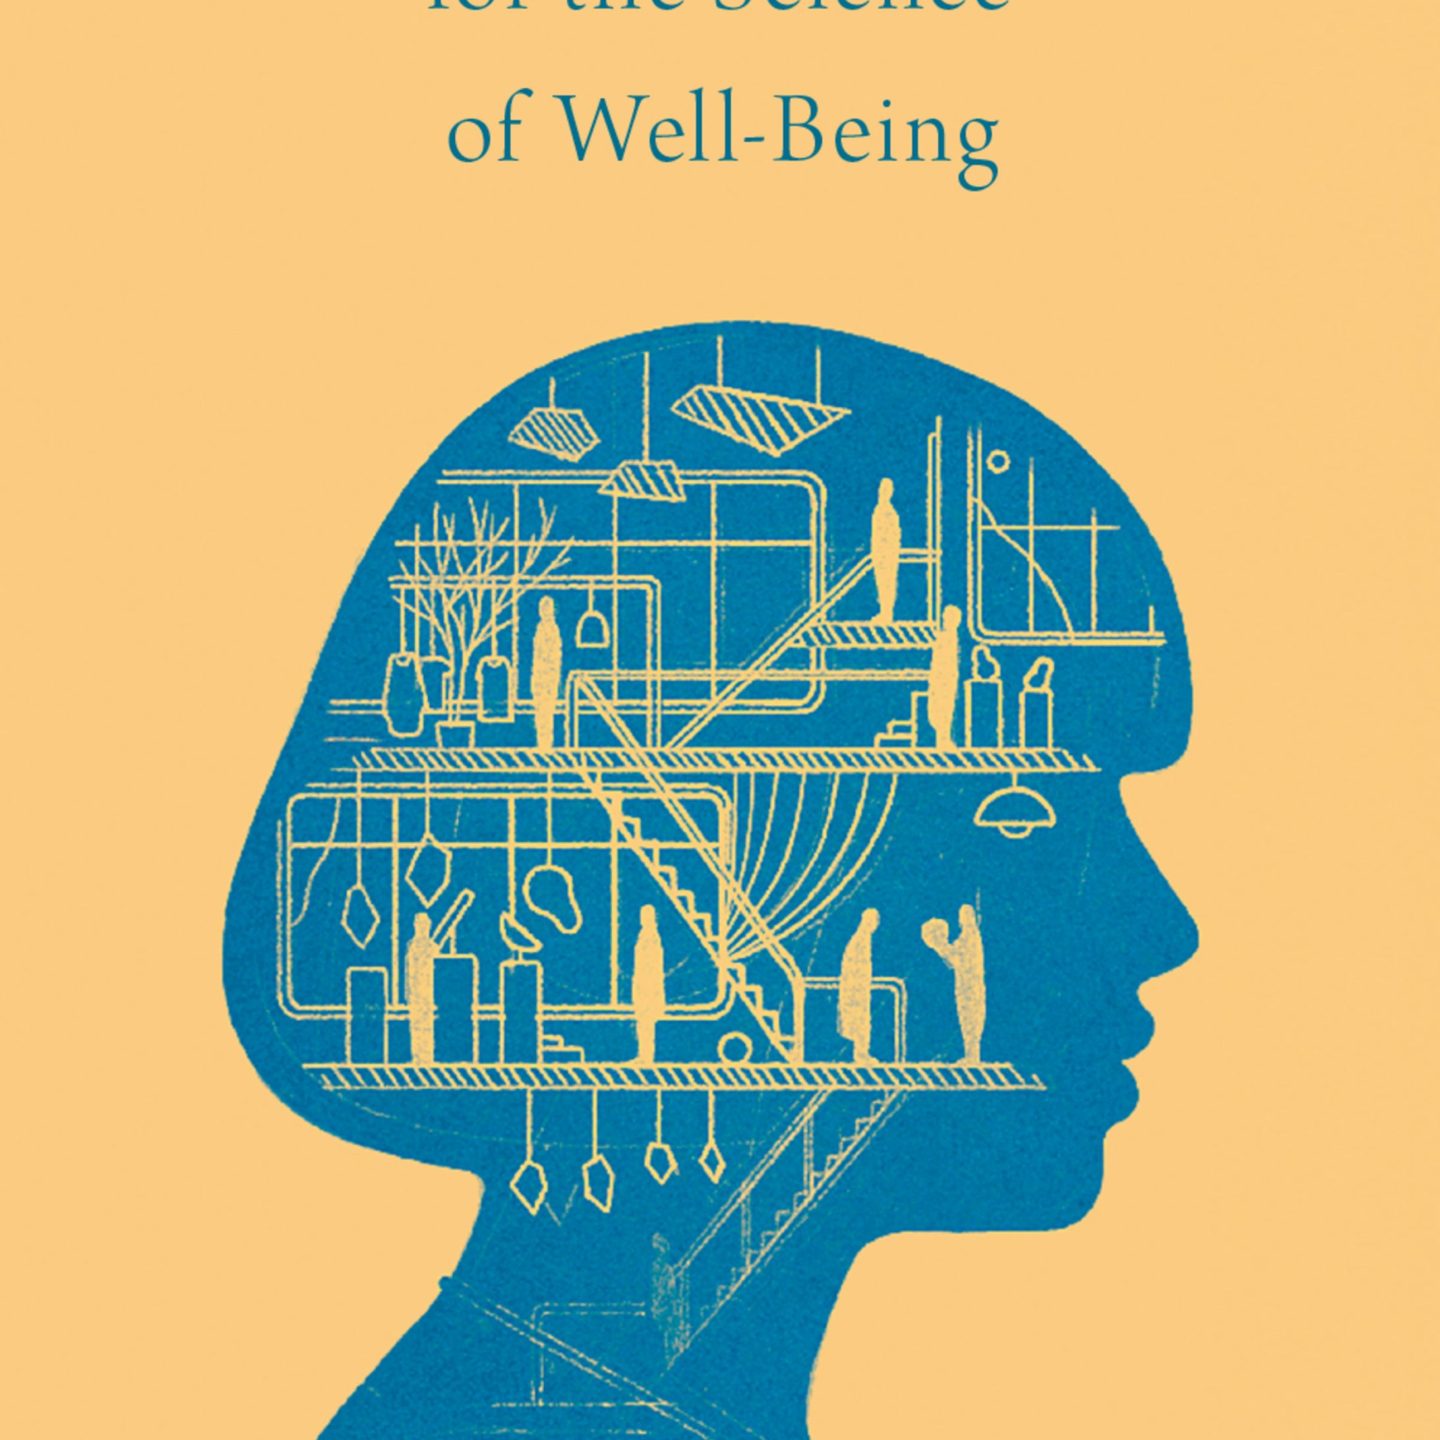 Is there a single concept of well-being?